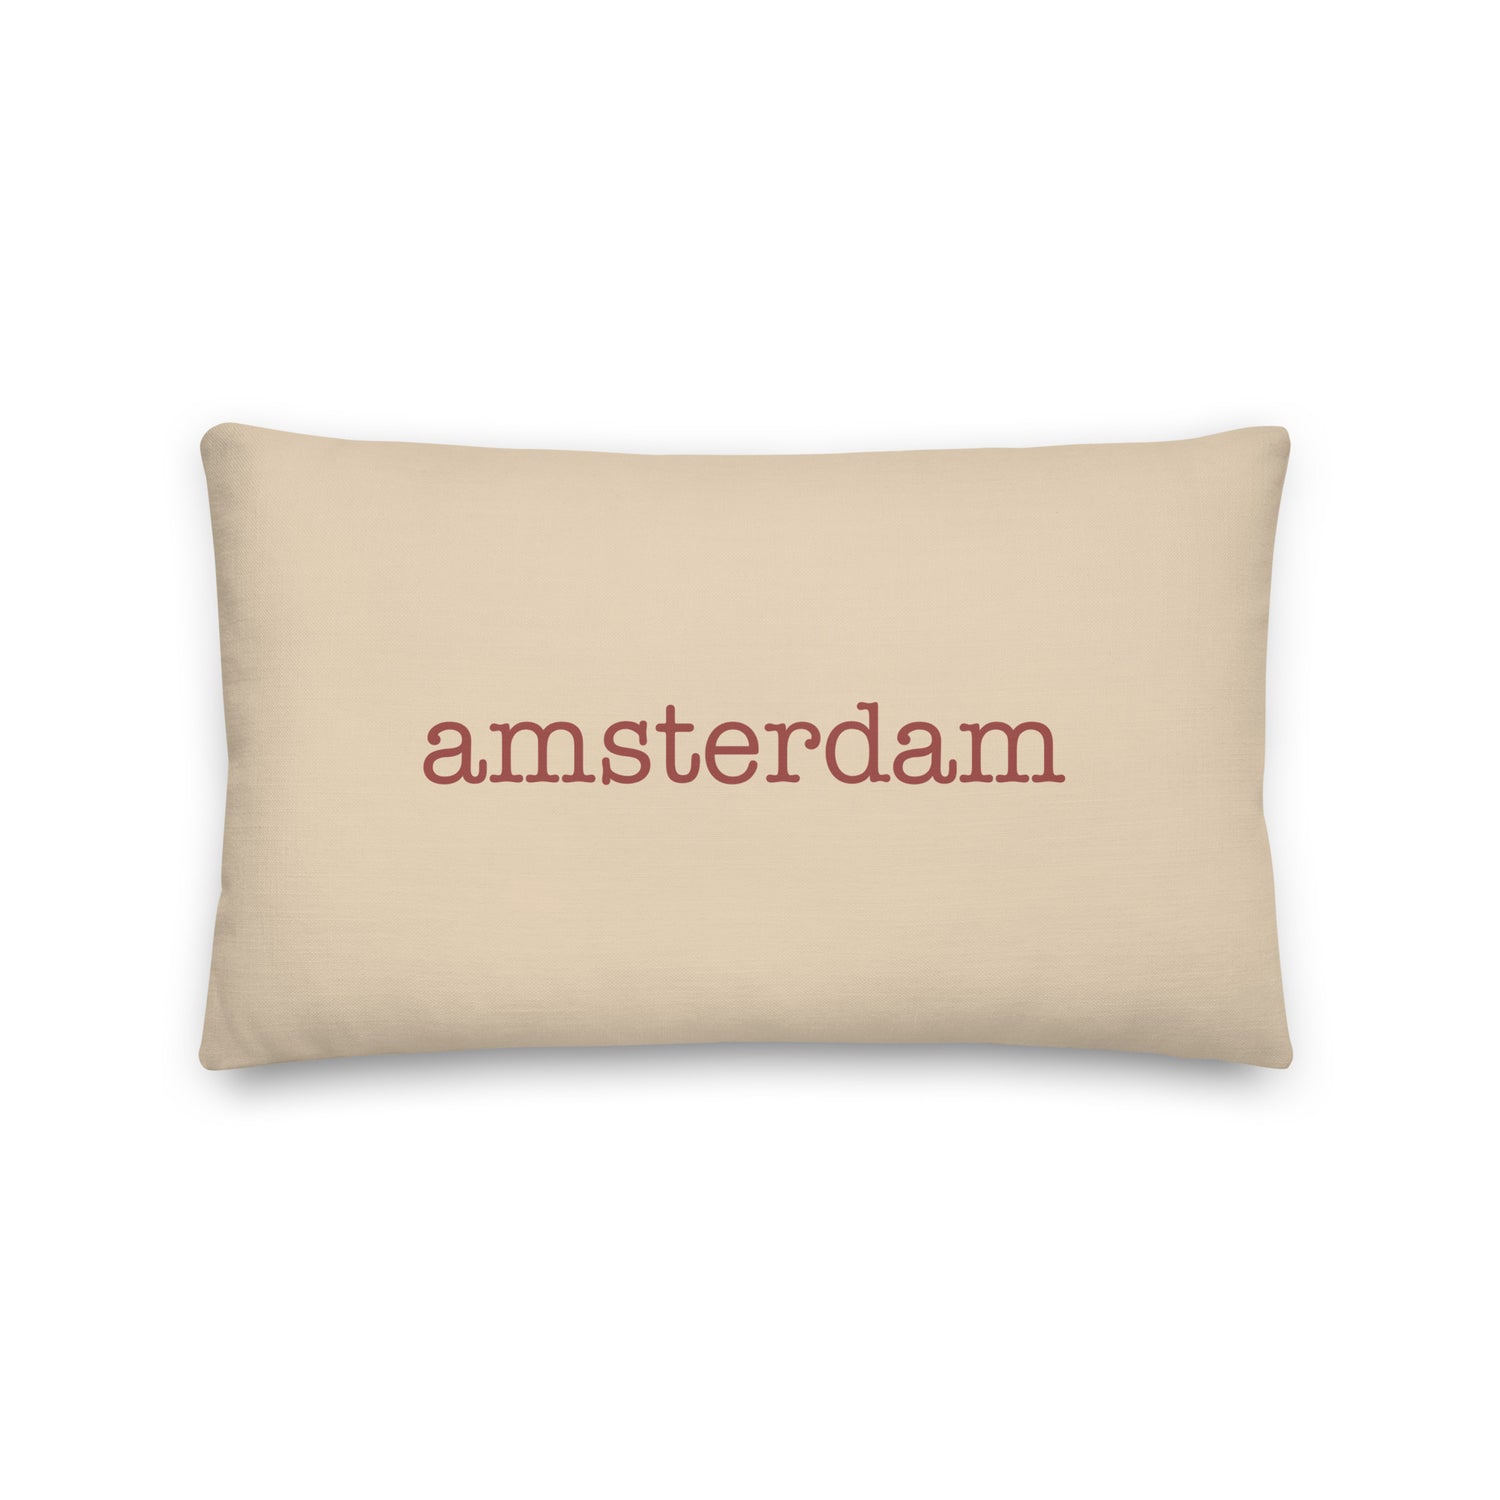 Amsterdam Netherlands Pillows and Blankets • AMS Airport Code